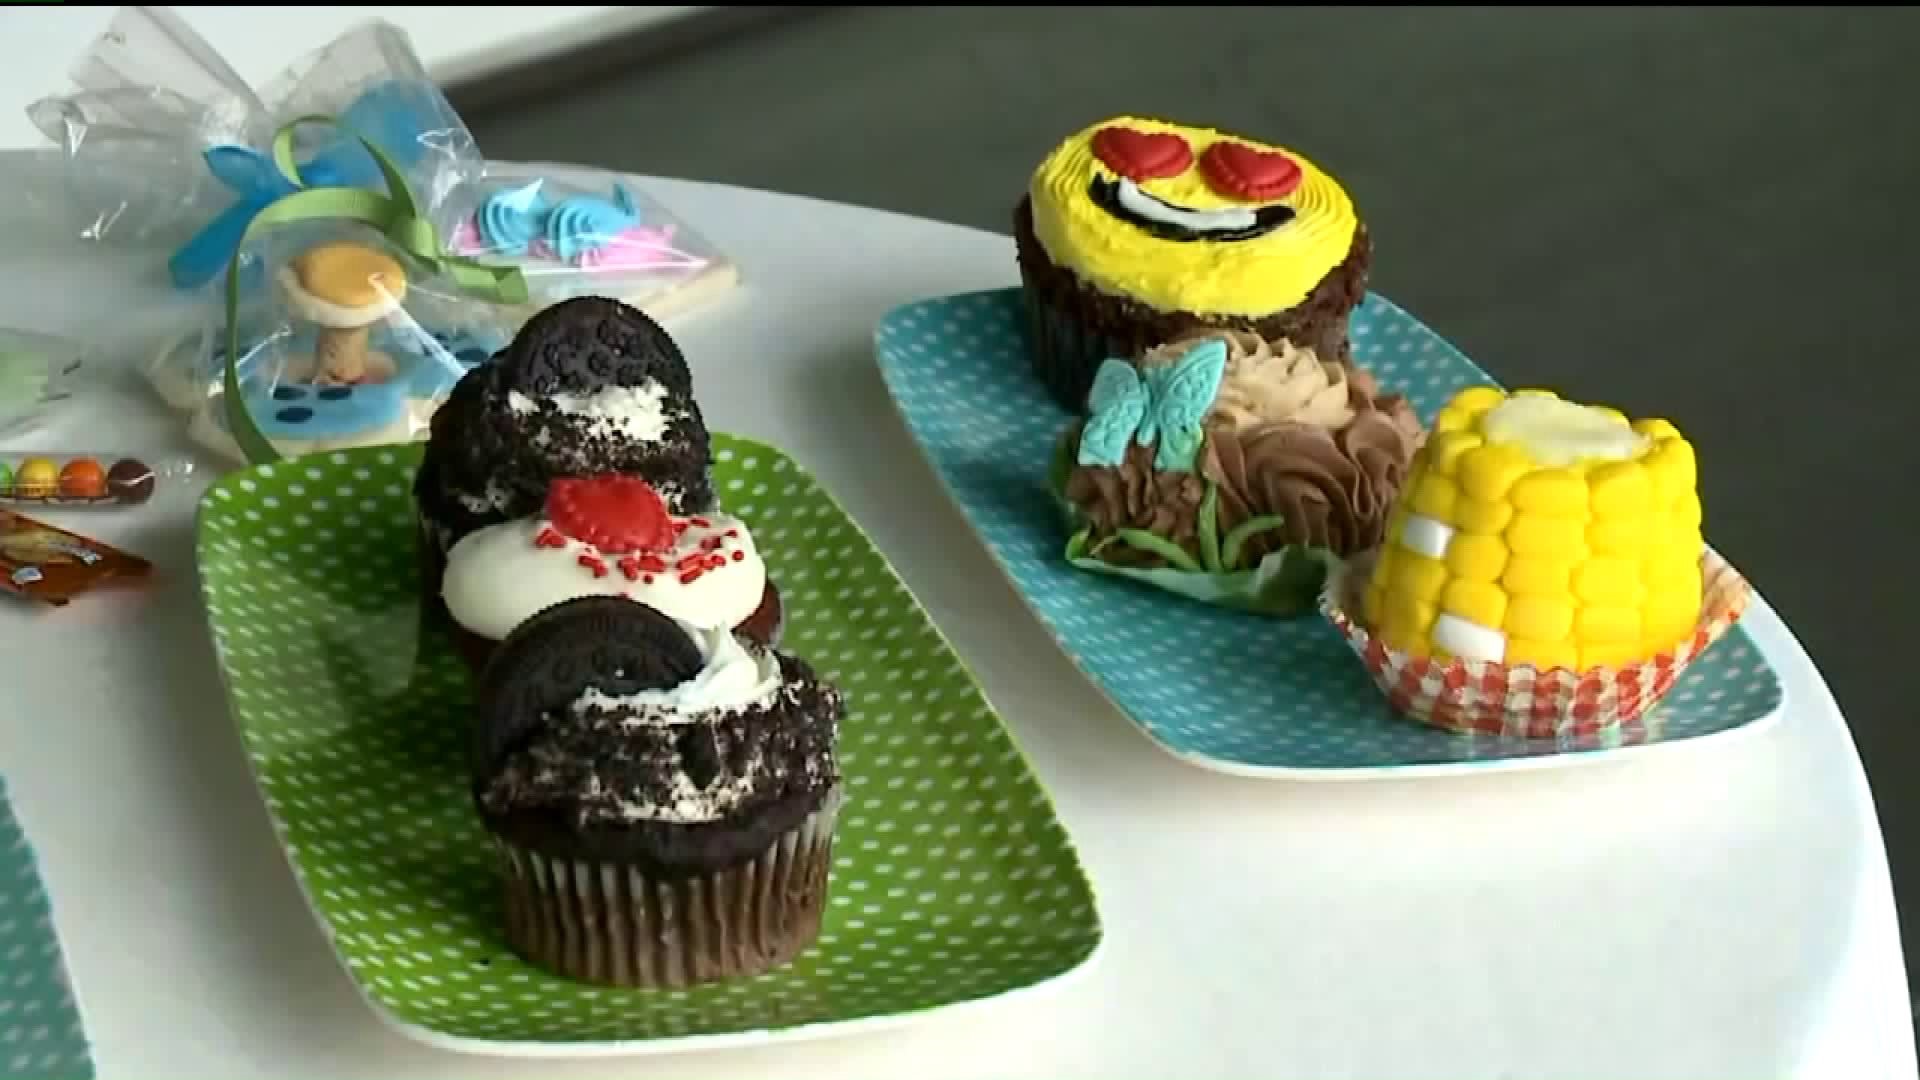 Cupcake Bakers Wanted for Challenge in the Poconos